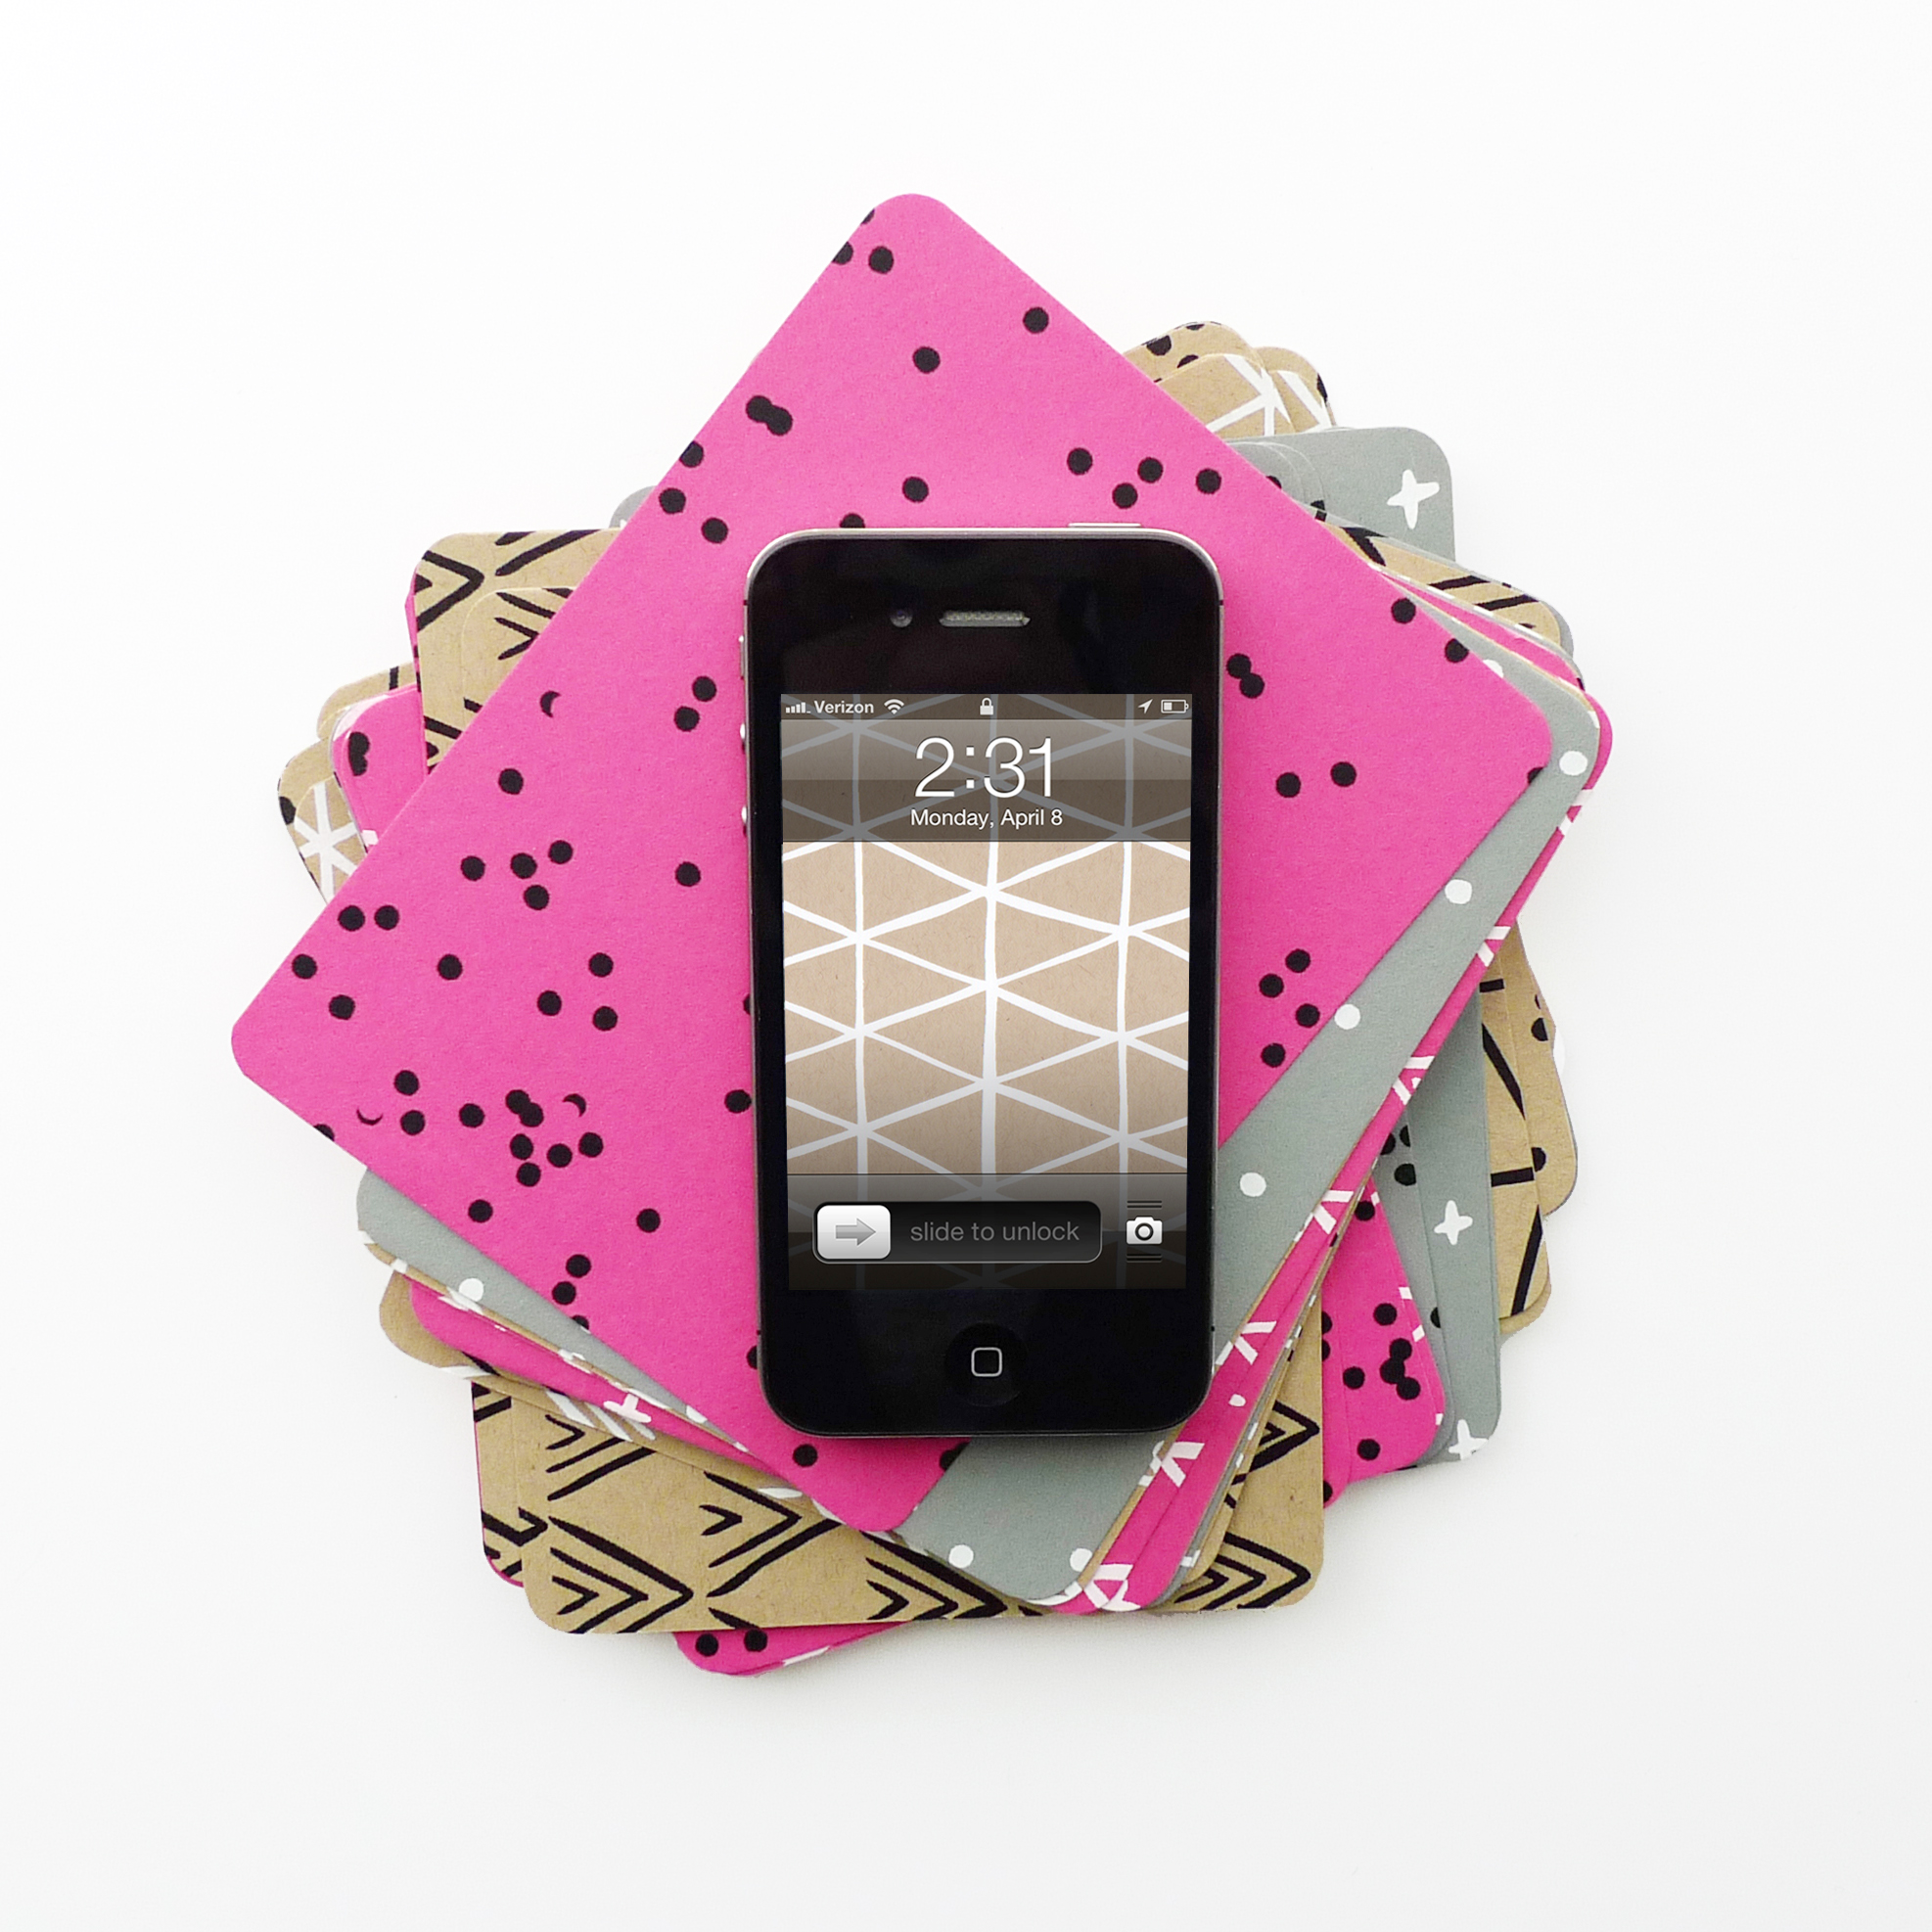 free iPhone wallpaper from Cotton & Flax